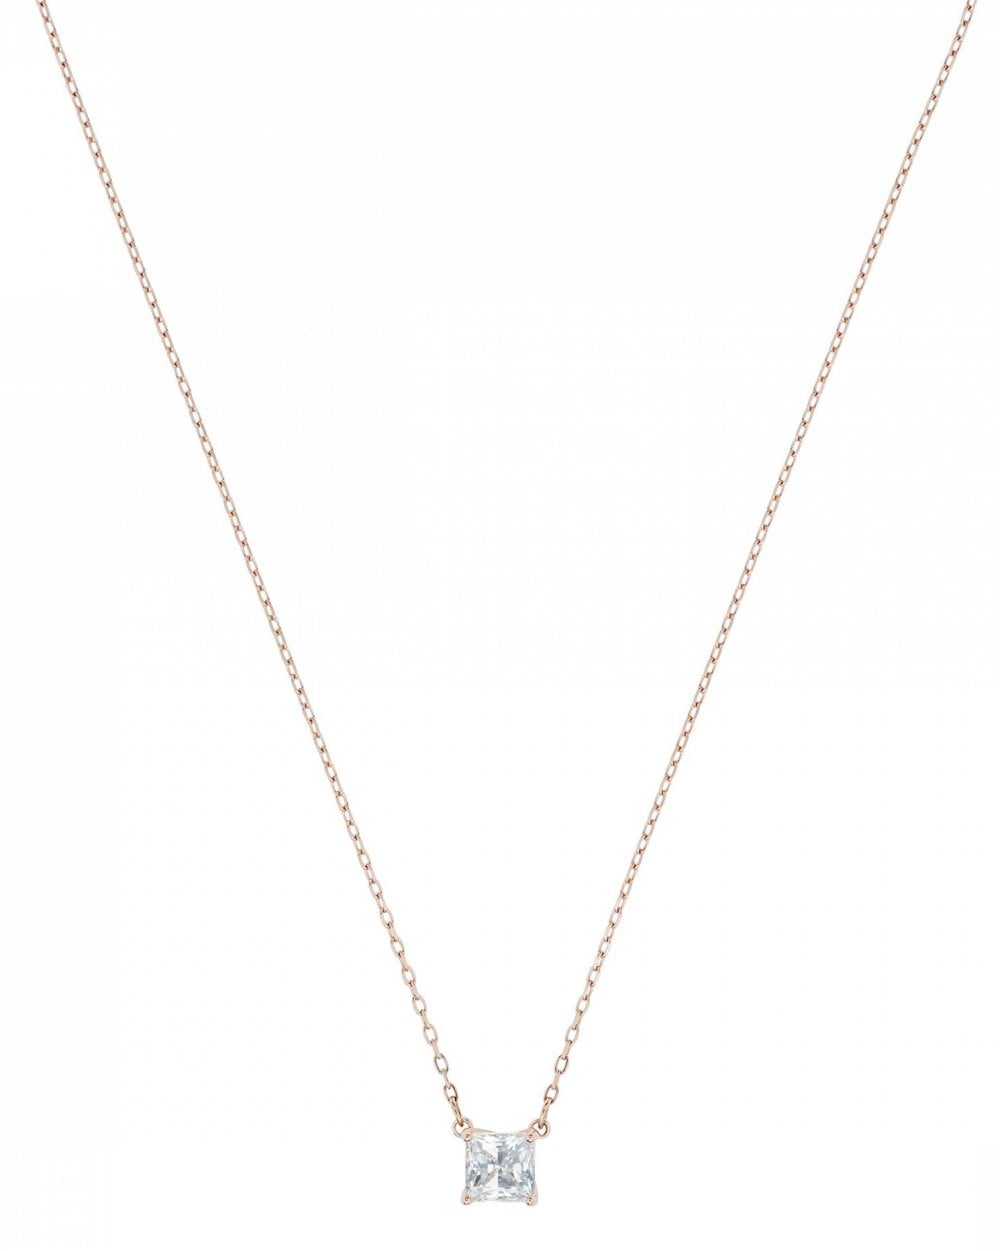 Attract Necklace- White and Rose Gold